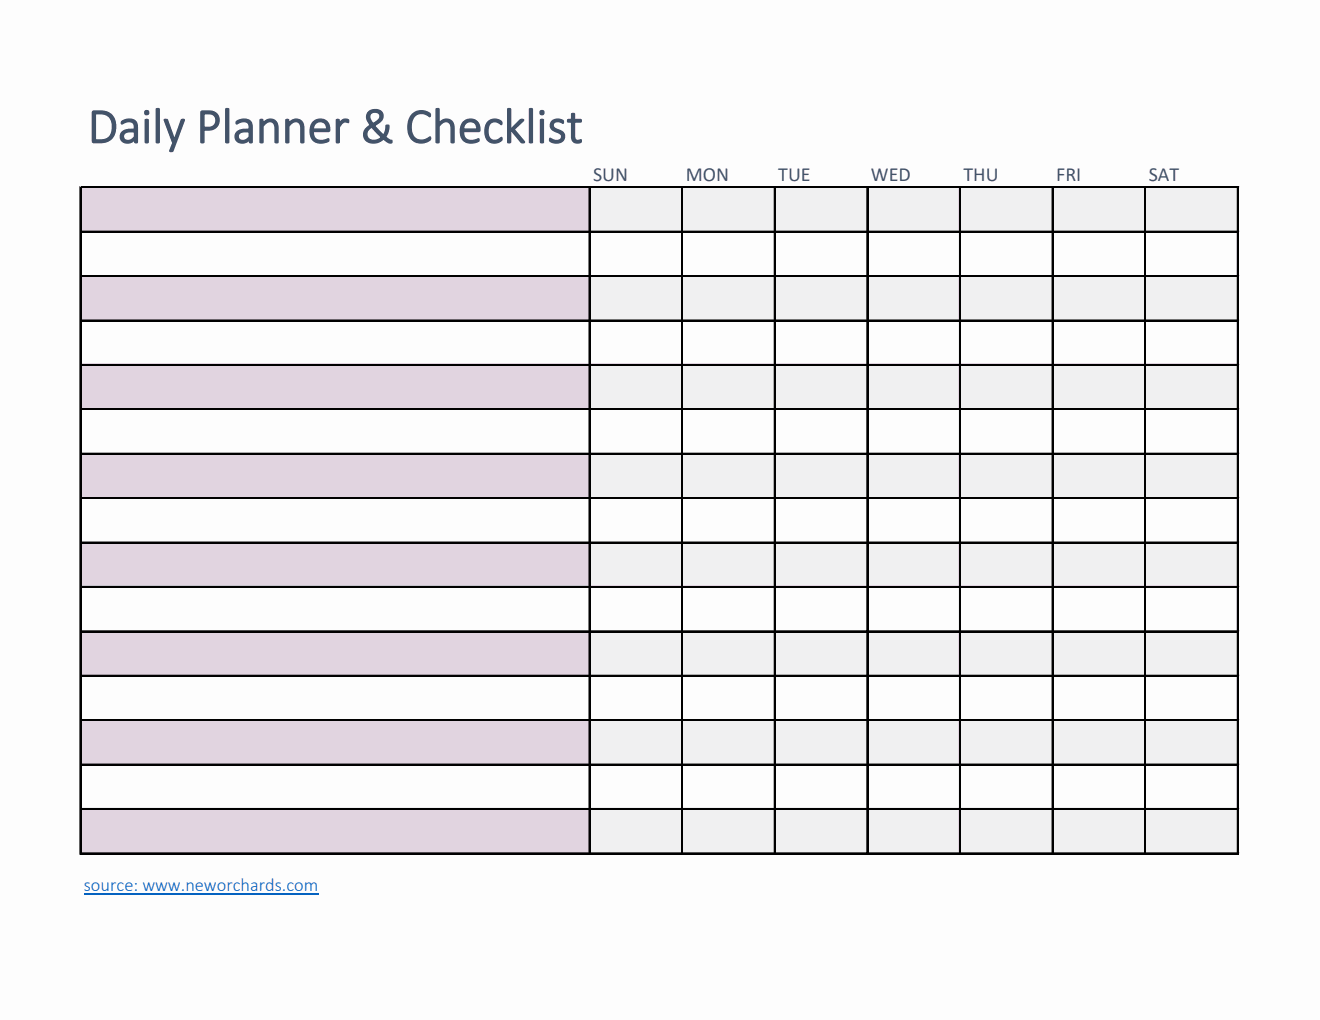 Daily Planner and Checklist Template in Excel (Basic)